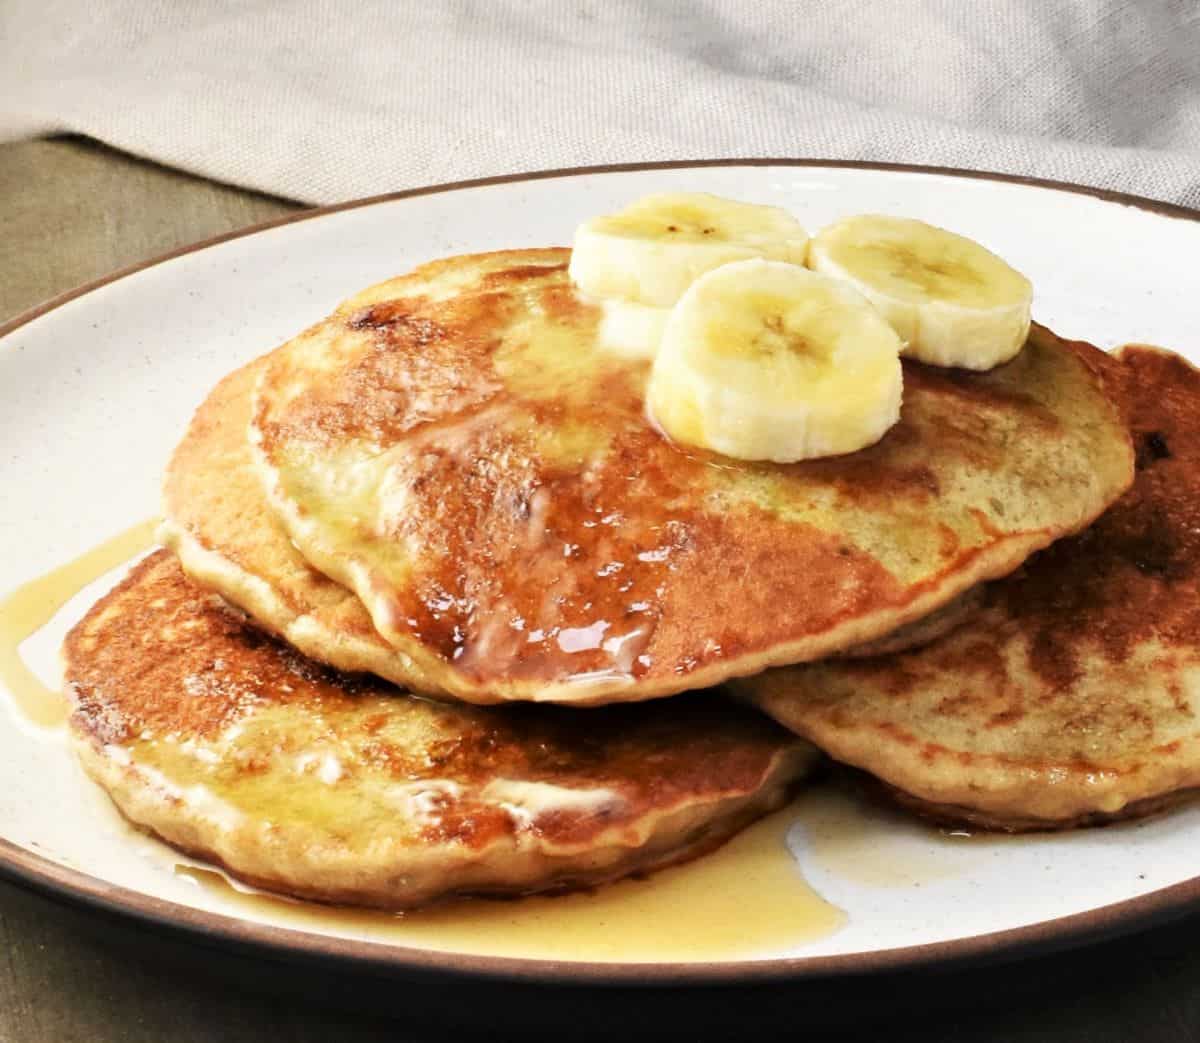 Side view of pancakes with slices of banana and maple syrup.